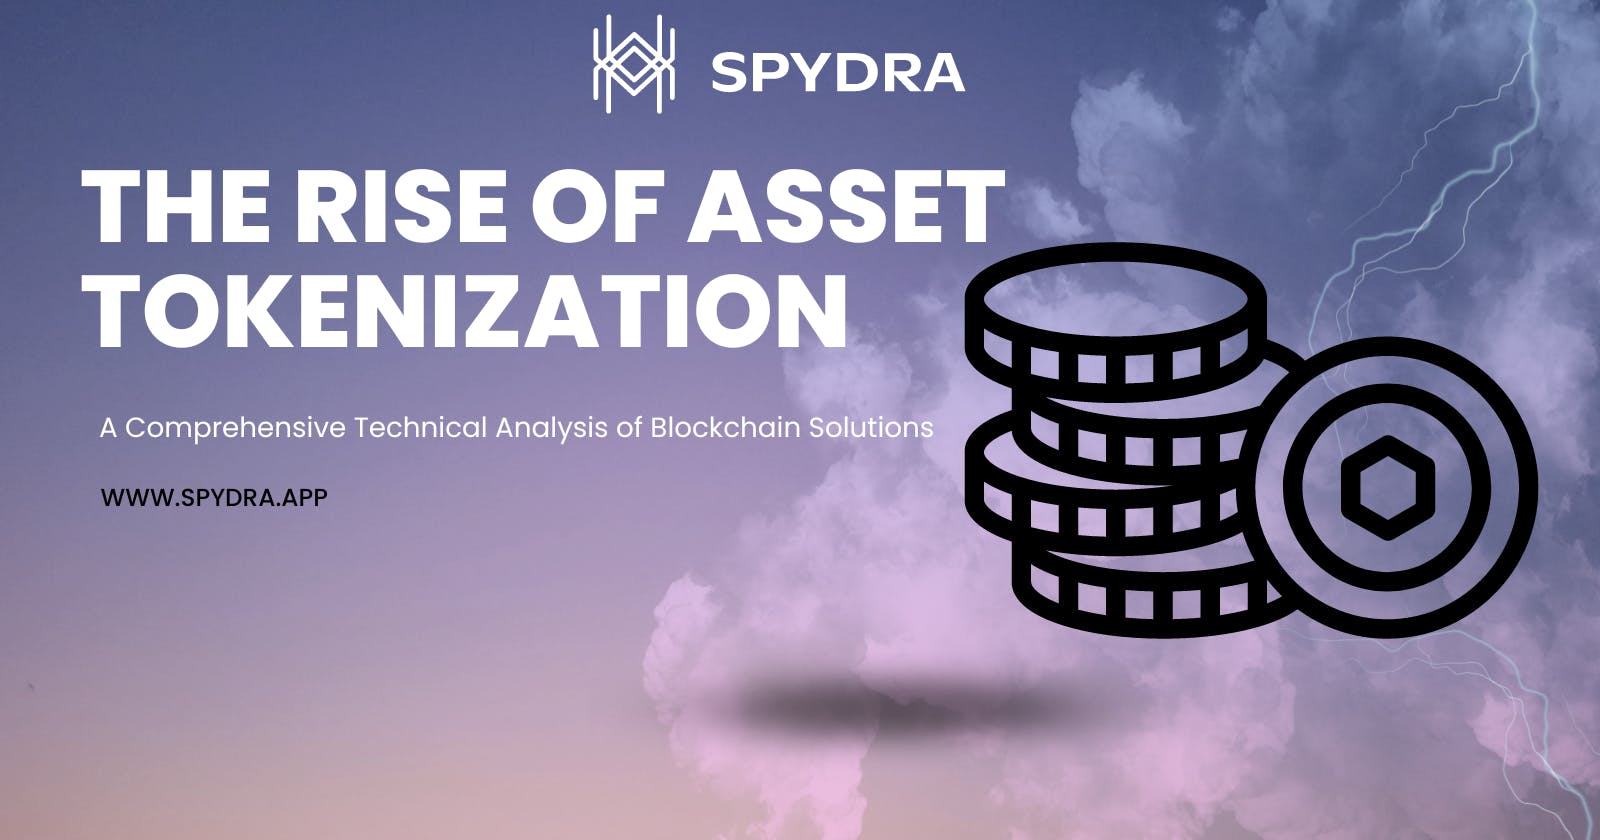 The Rise of Asset Tokenization: A Comprehensive Technical Analysis of Blockchain Solutions